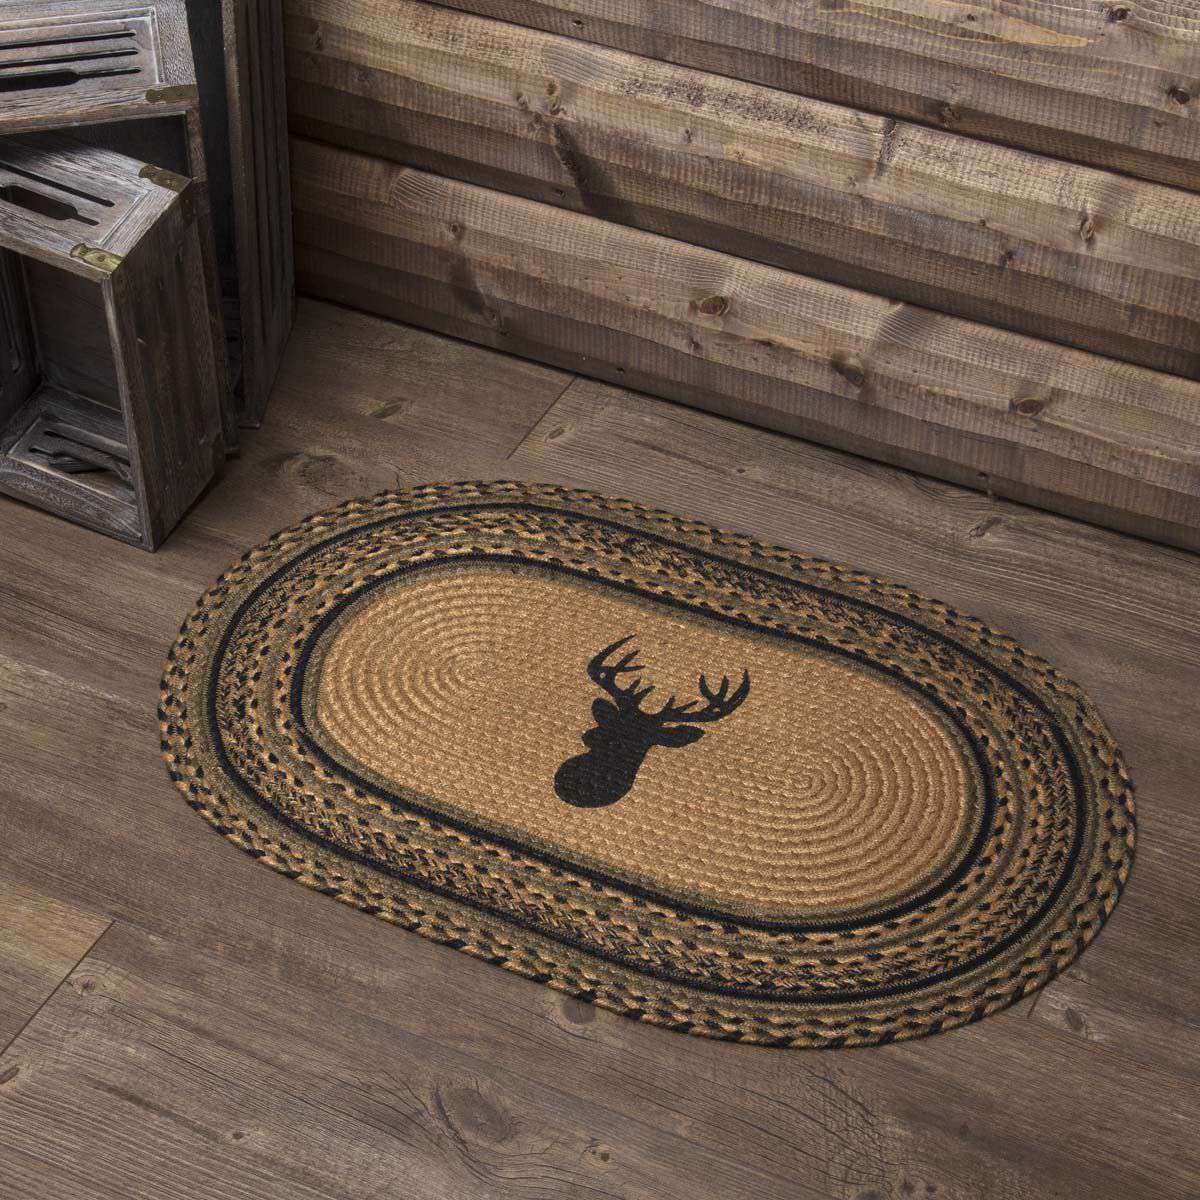 Trophy Mount Jute Braided Rug Oval rugs VHC Brands 